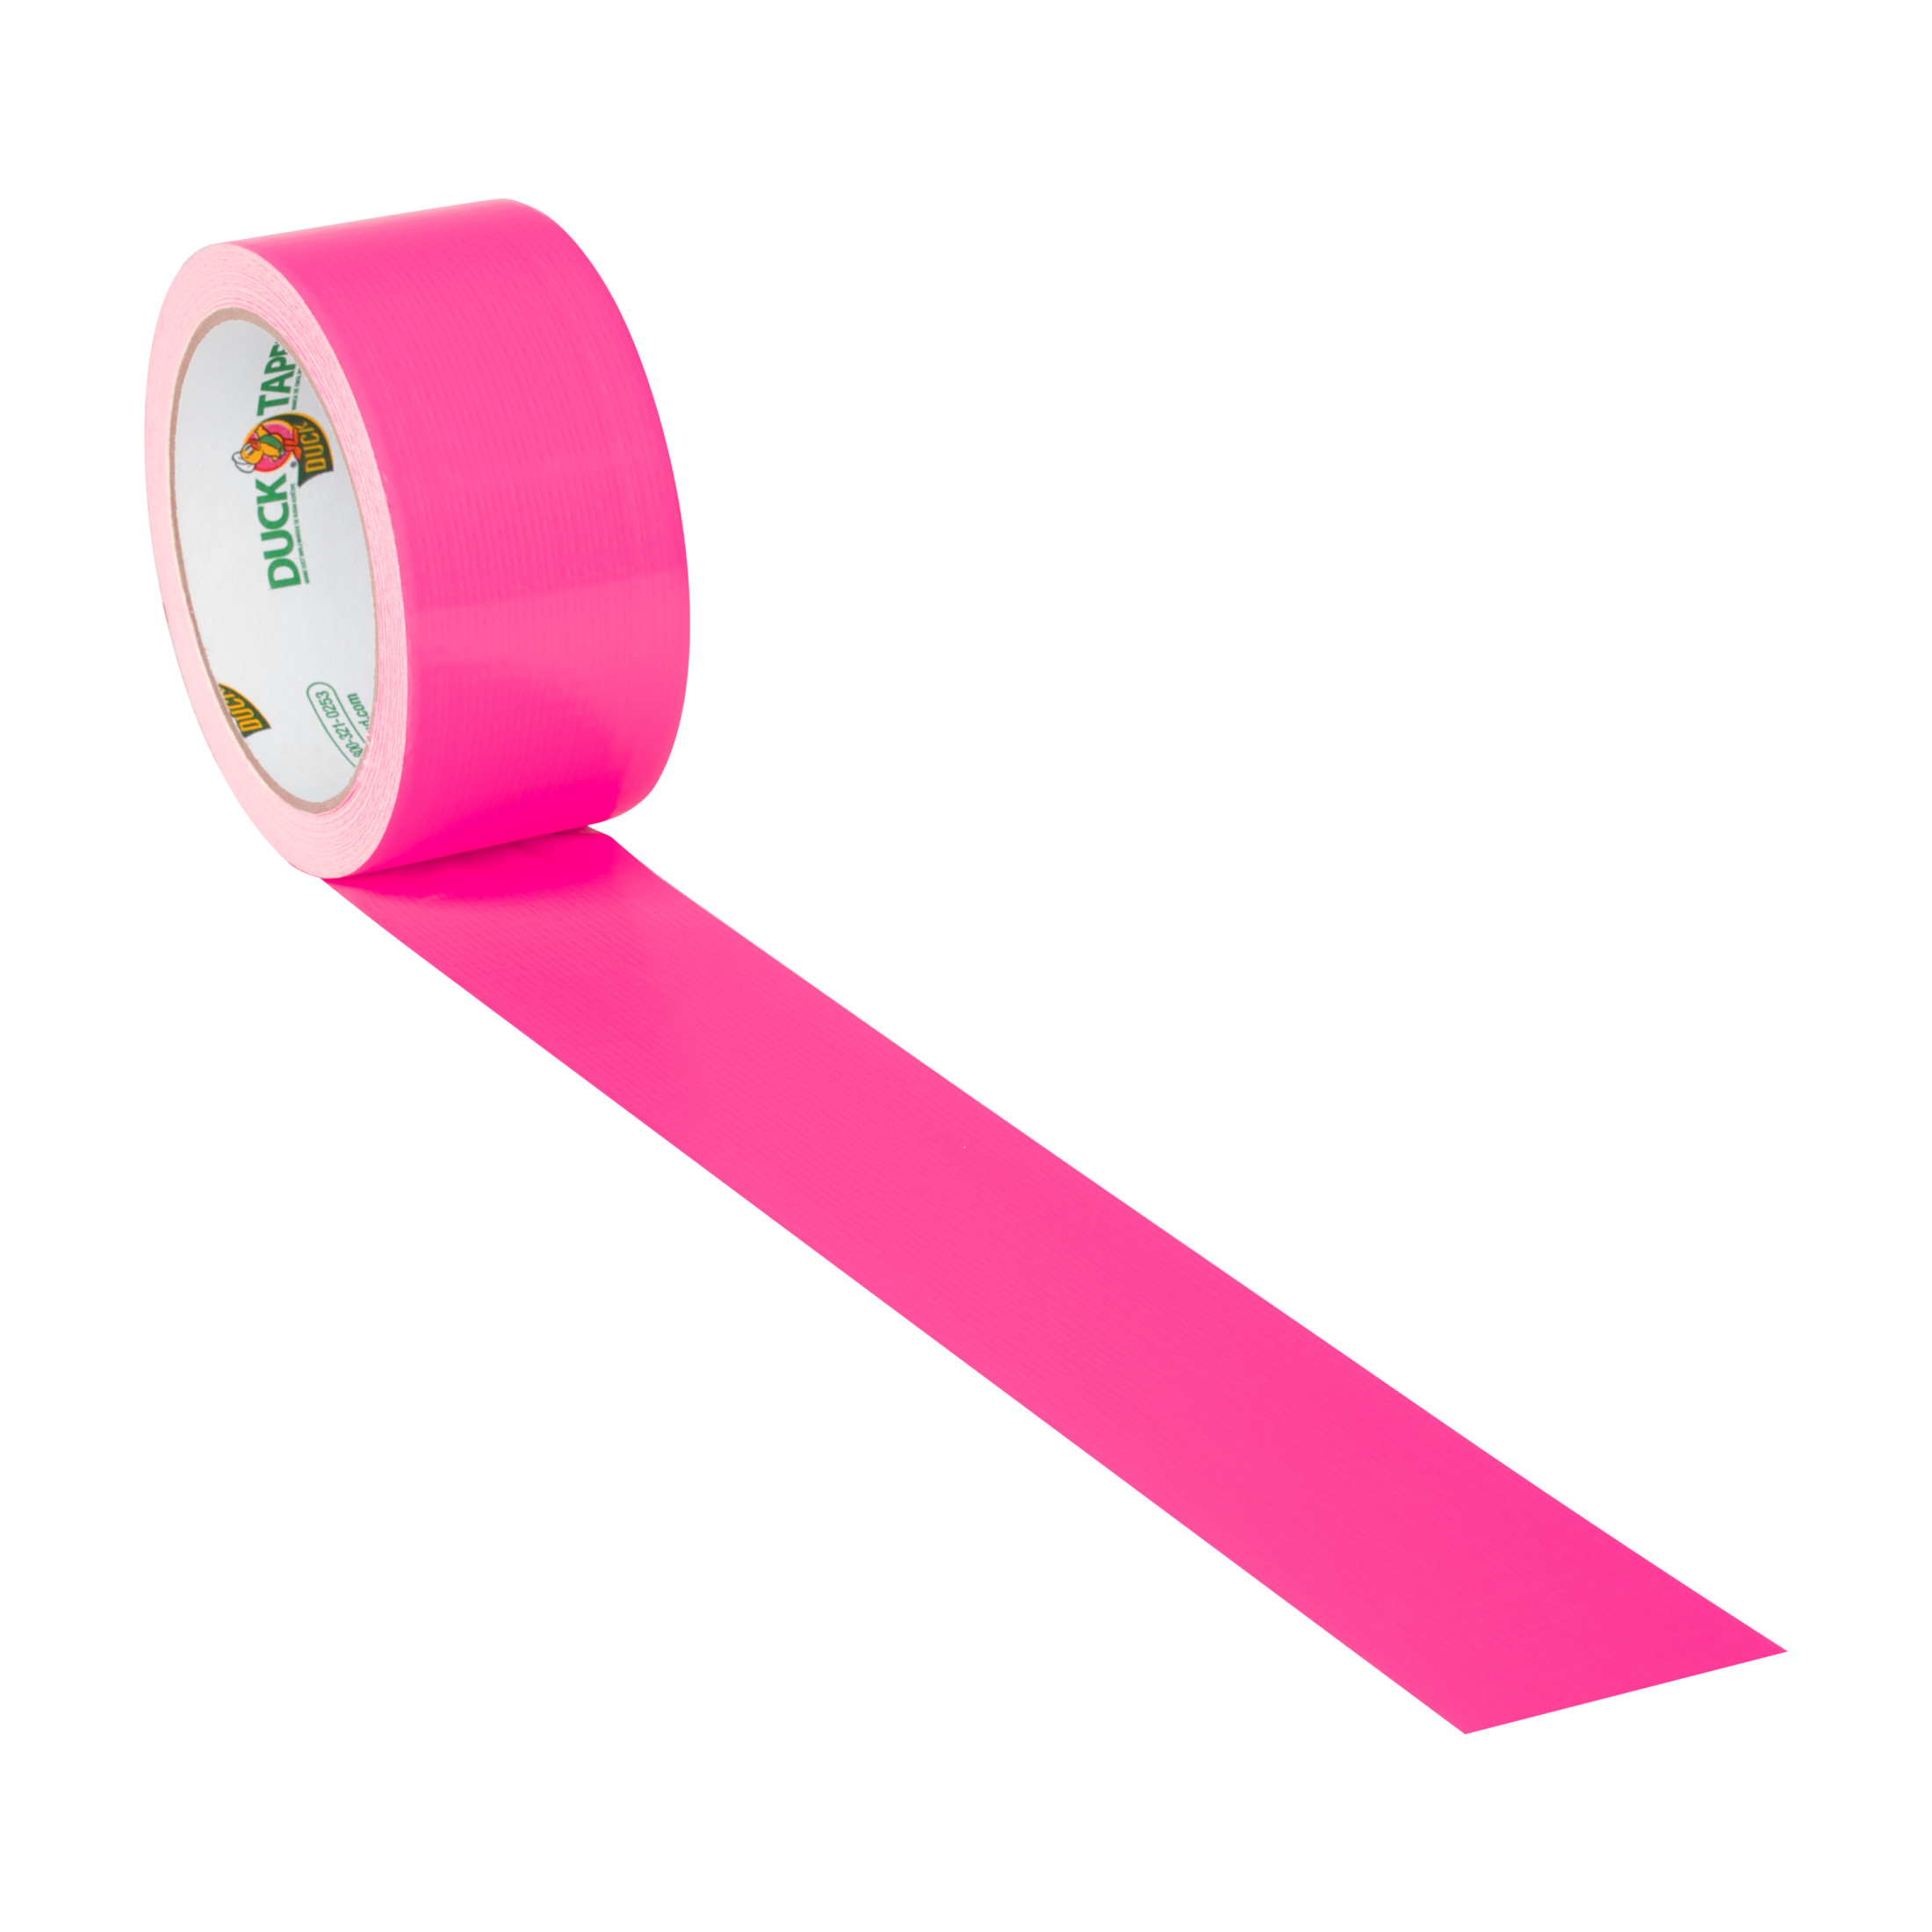 Duck Brand 1.88 in. x 15 yd. Neon Pink Colored Duct Tape - image 4 of 11